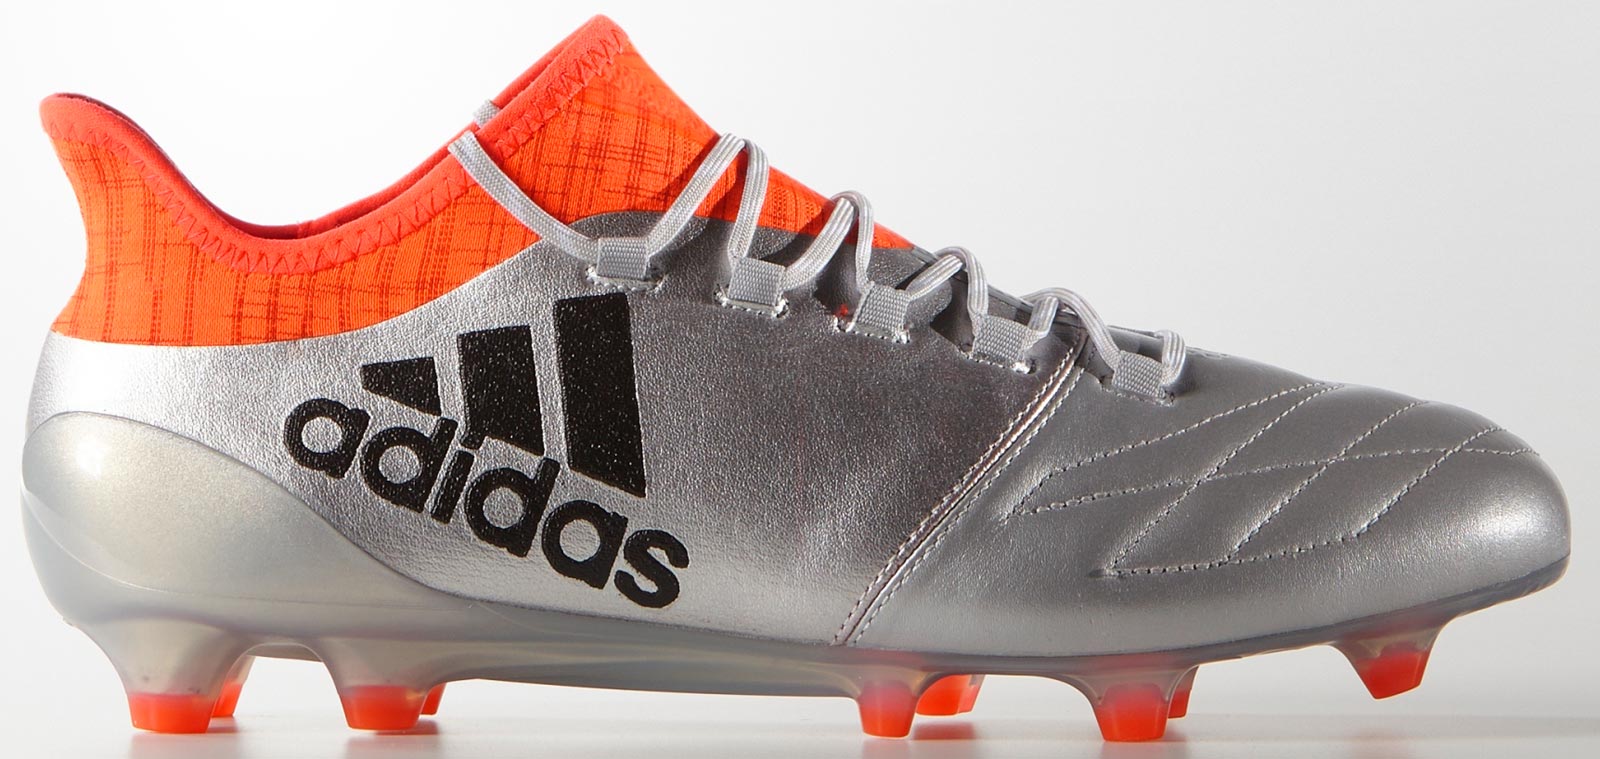 Silver Adidas X Euro 2016 Boots Leaked - Footy